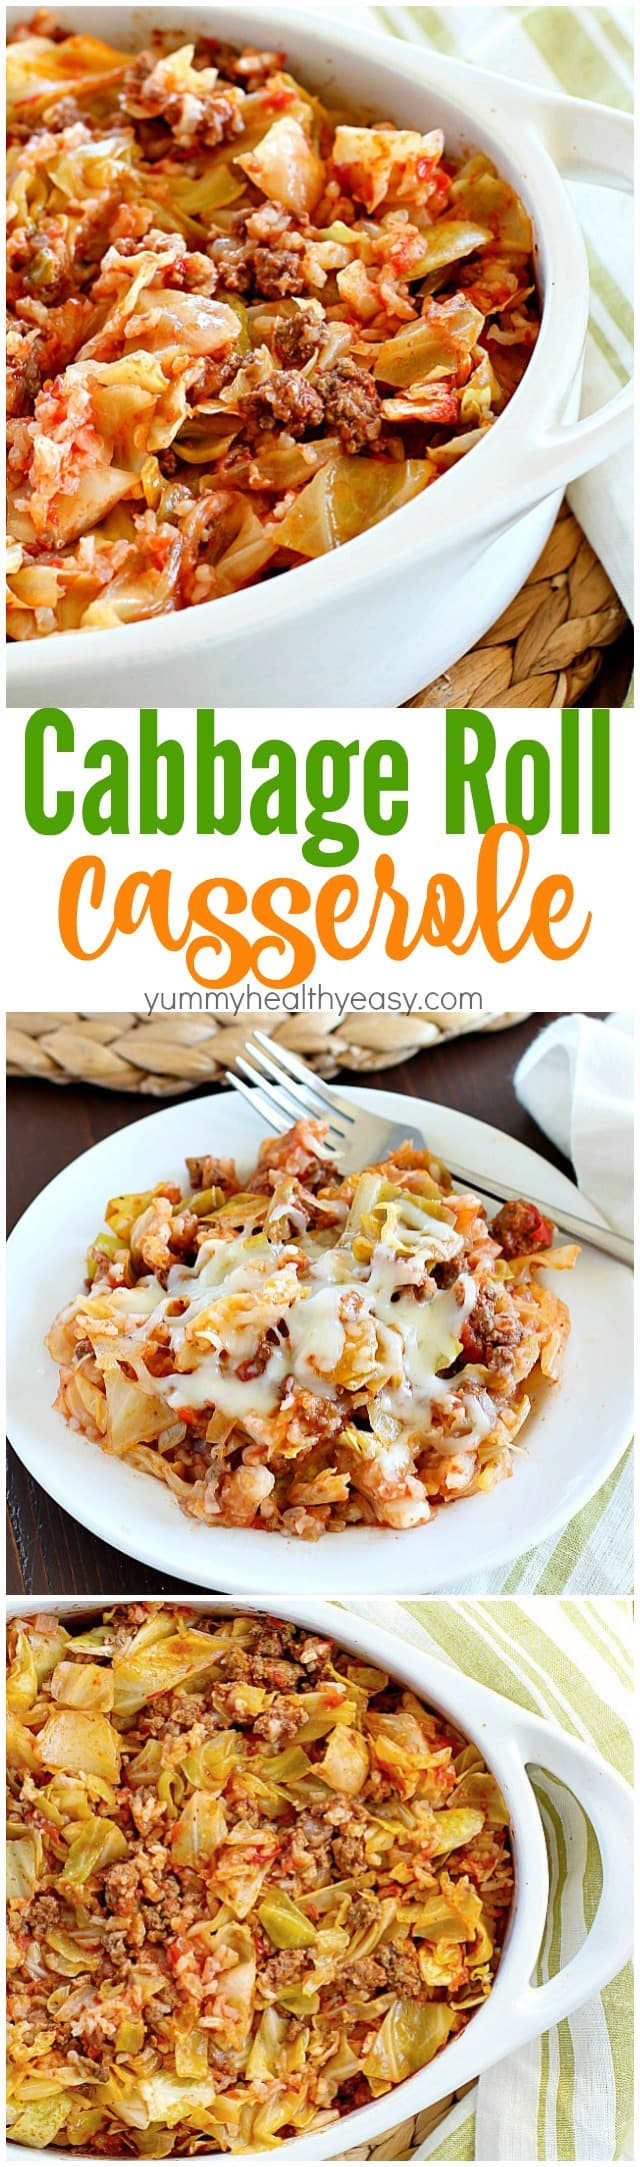 Cabbage Roll Casserole is much easier than making traditional cabbage rolls! This yummy casserole is slowly baked and full of ground beef, rice and cabbage in a light tomato sauce. Hearty, simple to make and delicious!